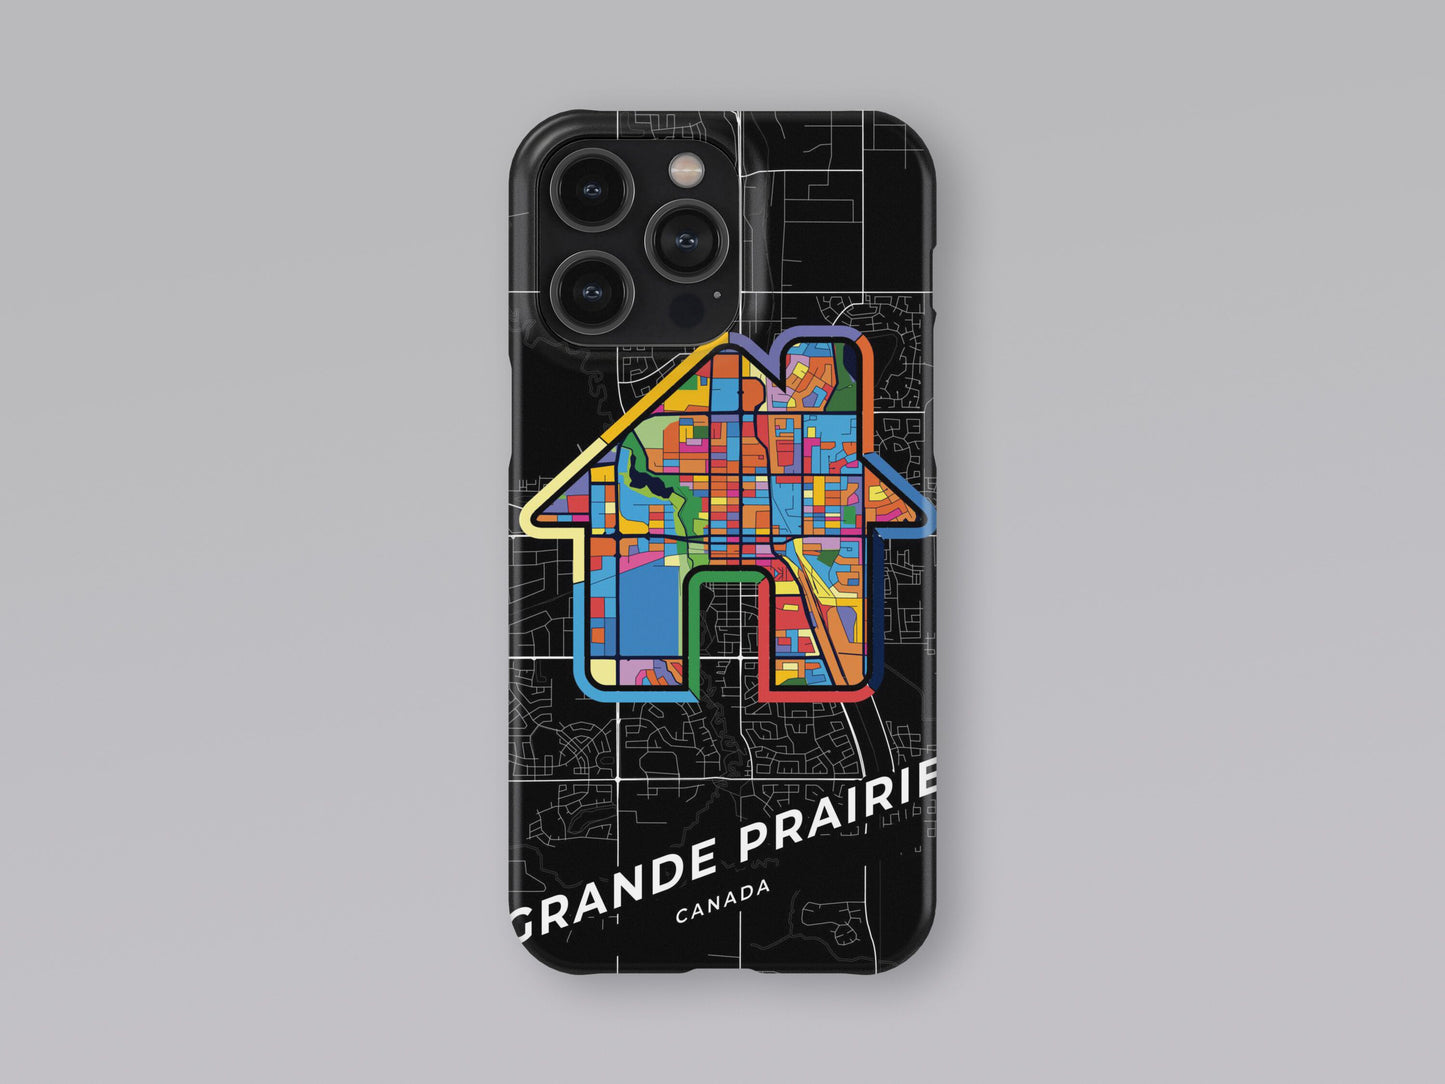 Grande Prairie Canada slim phone case with colorful icon. Birthday, wedding or housewarming gift. Couple match cases. 3